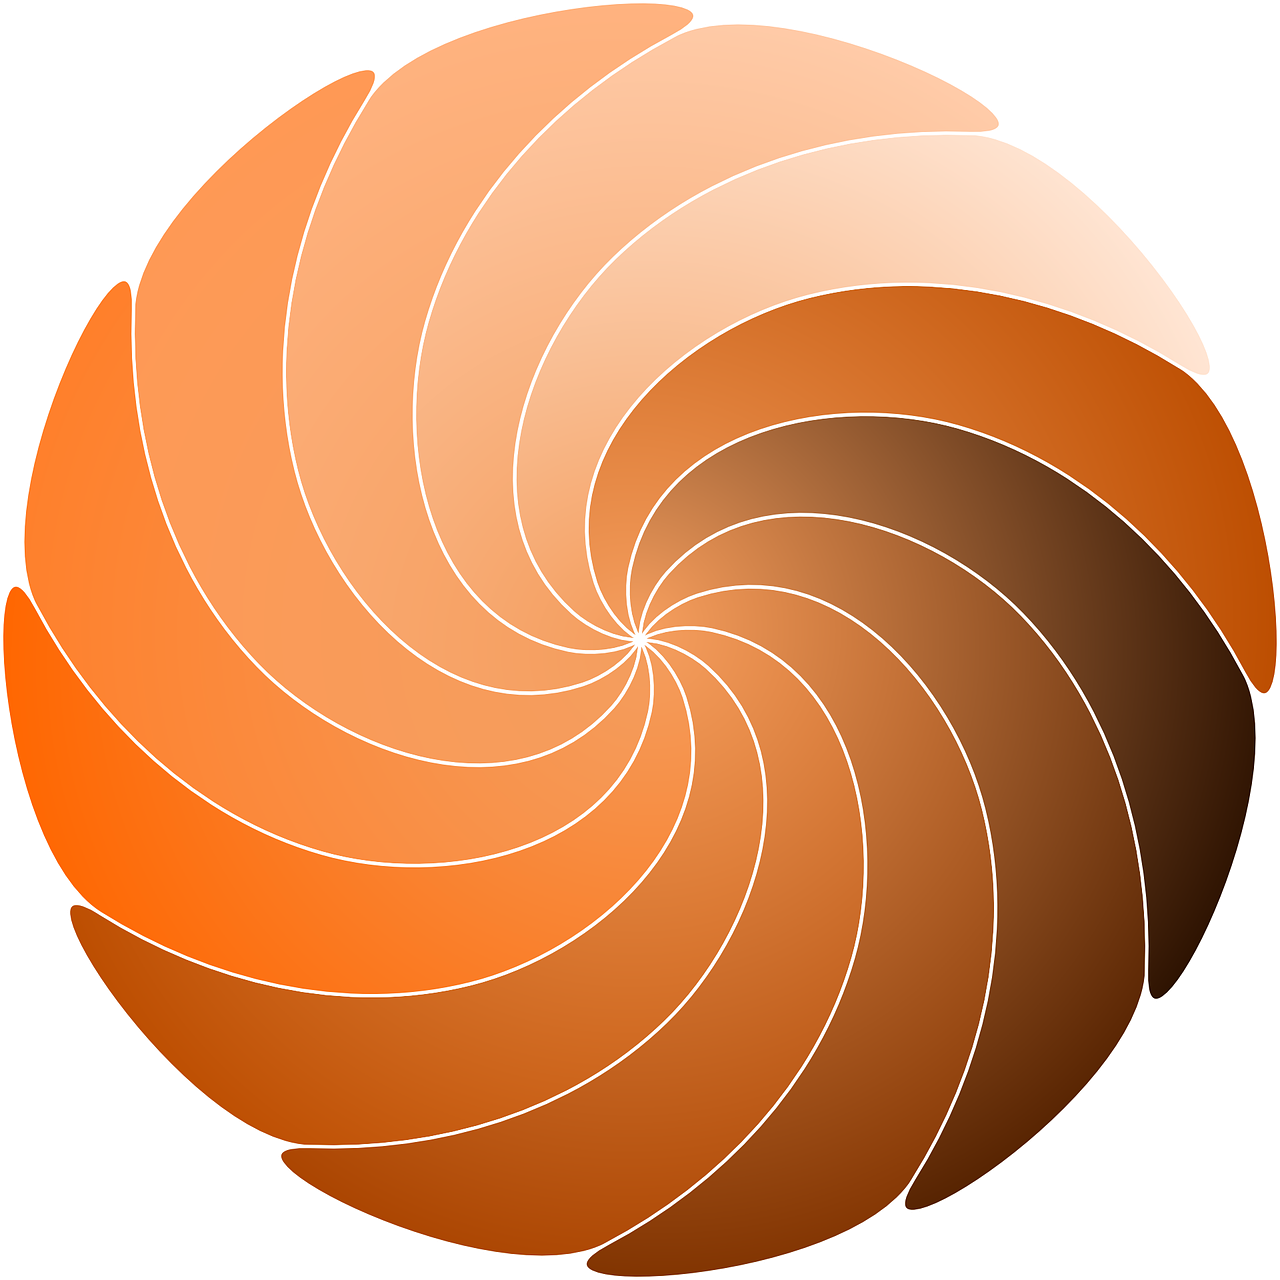 Abstract Orange Spiral Graphic PNG